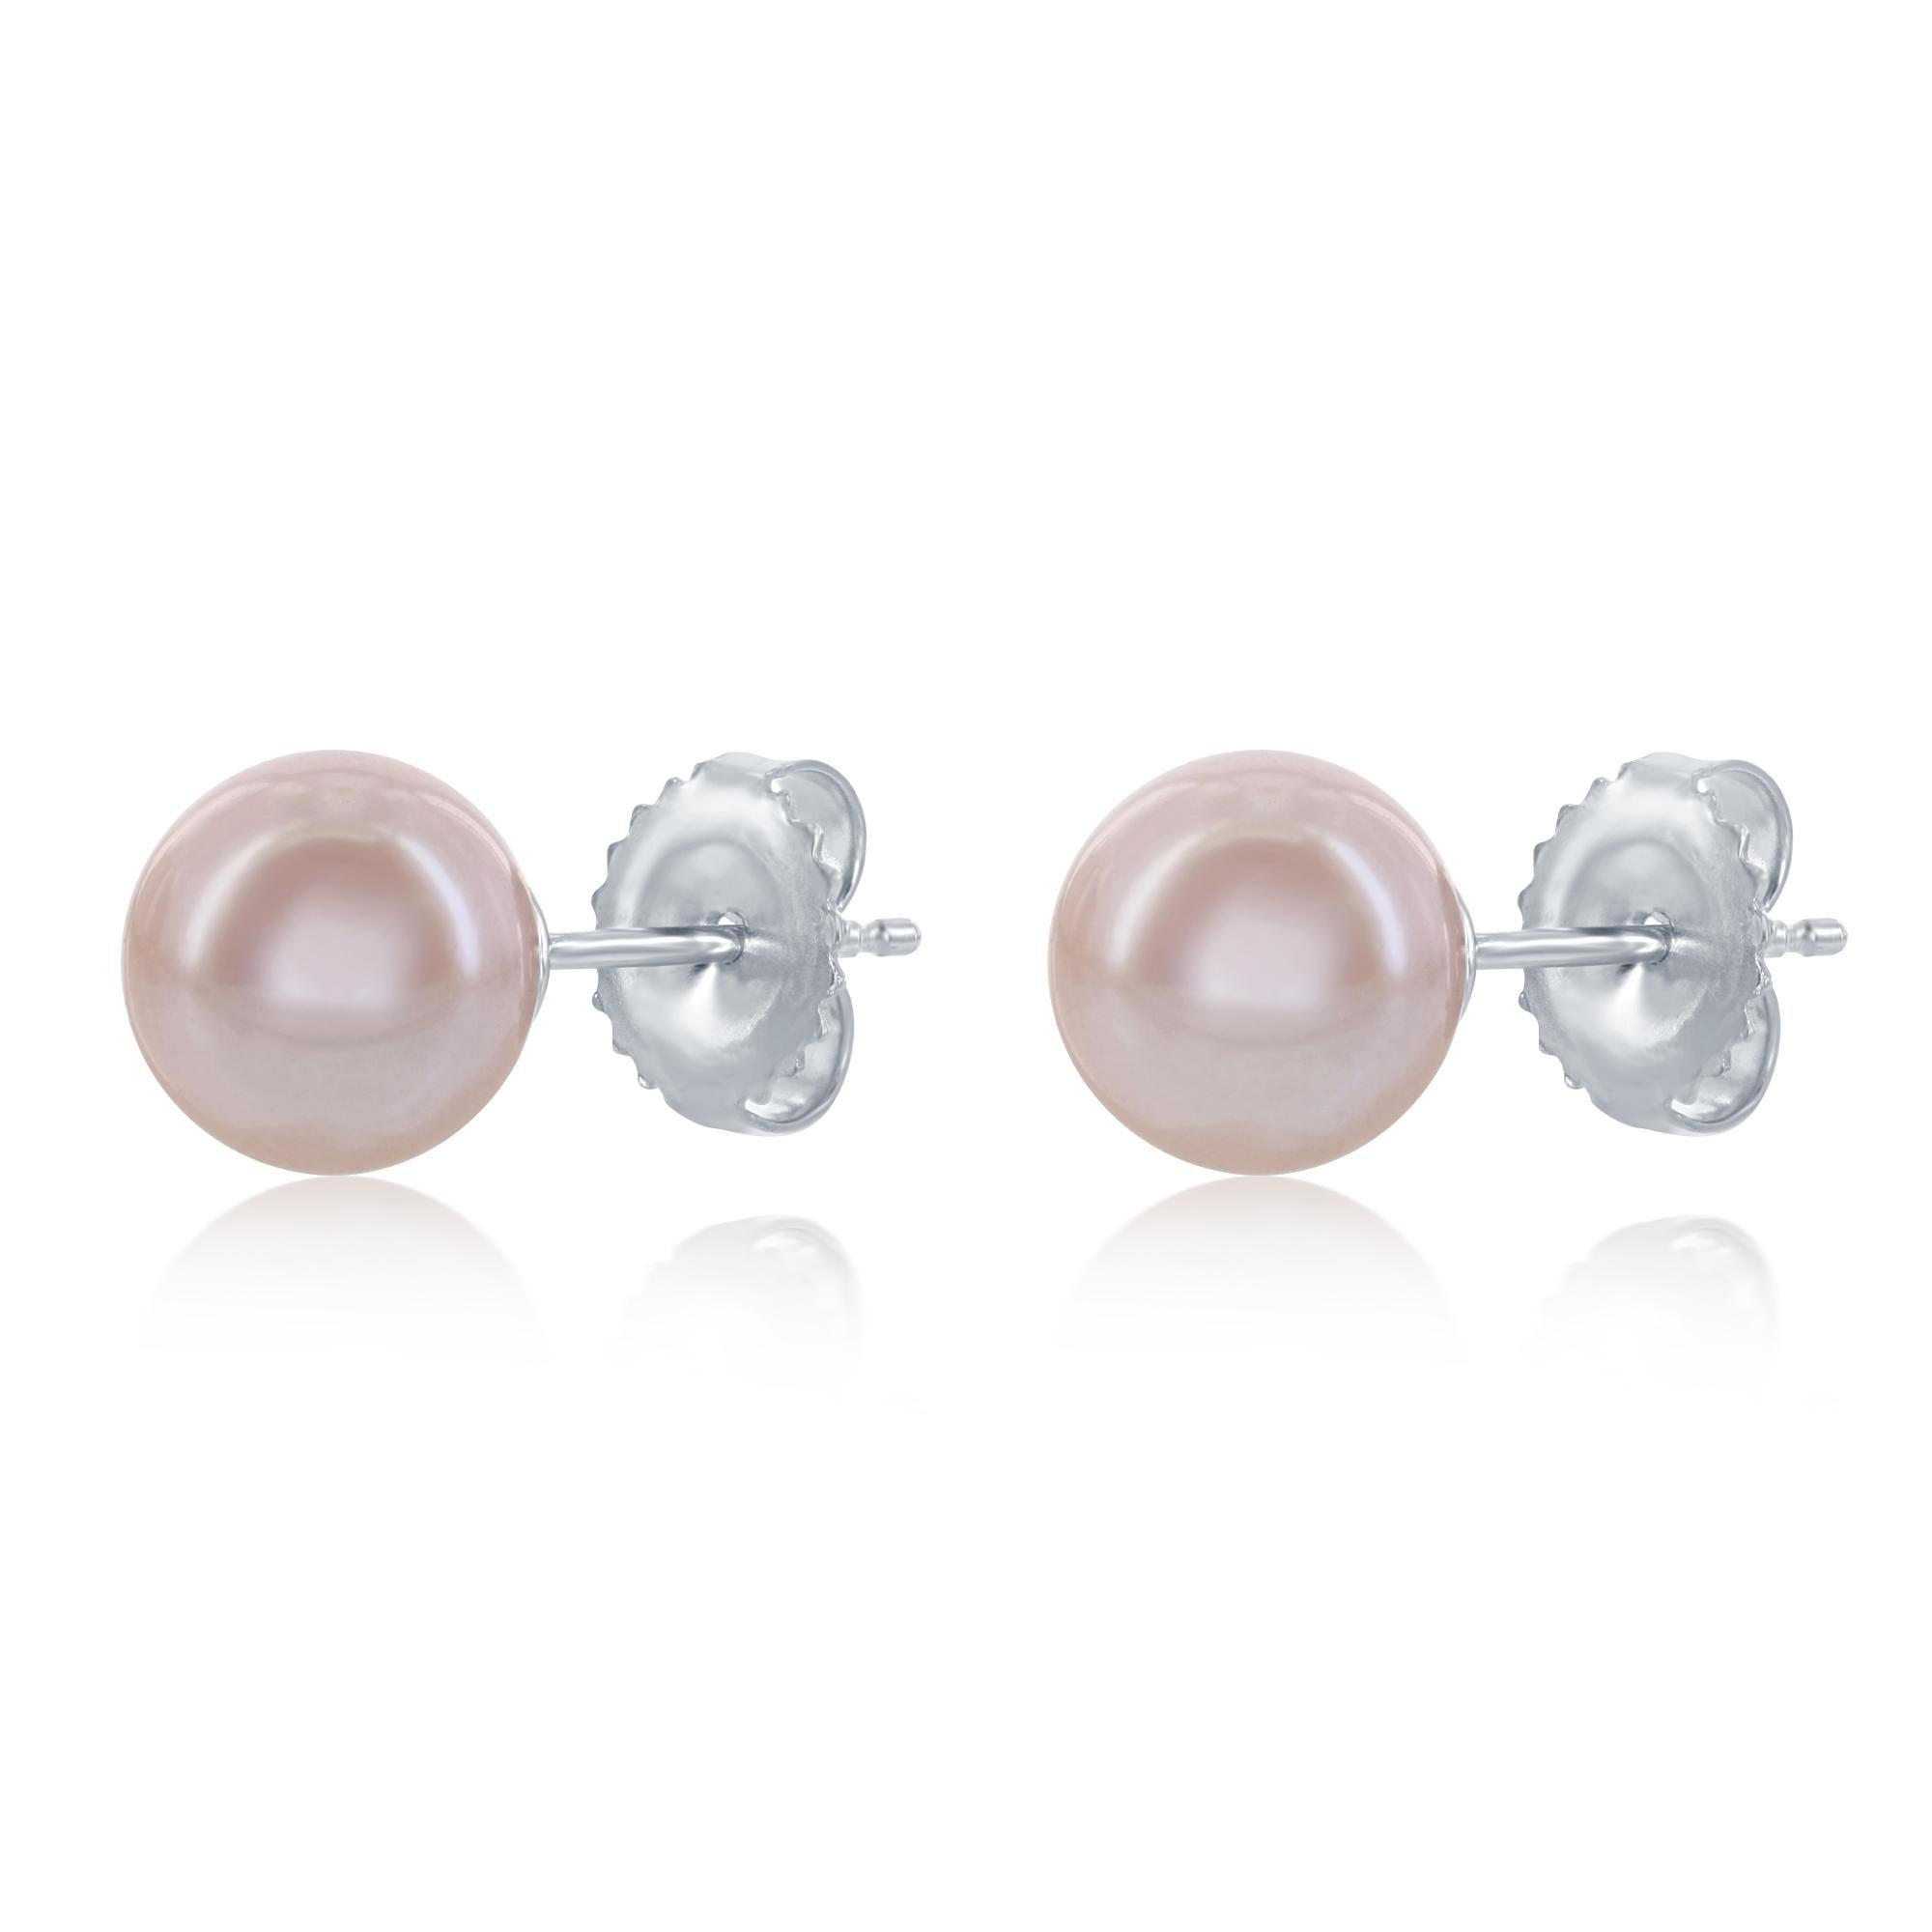 These Chinese freshwater cultured pearls are a natural pink color. The pearls are perfectly round 8-8.5mm pearls. The studs are set on 14 karat white gold. The gorgeous, versatile hue makes these earrings great for everyday casual elegance or